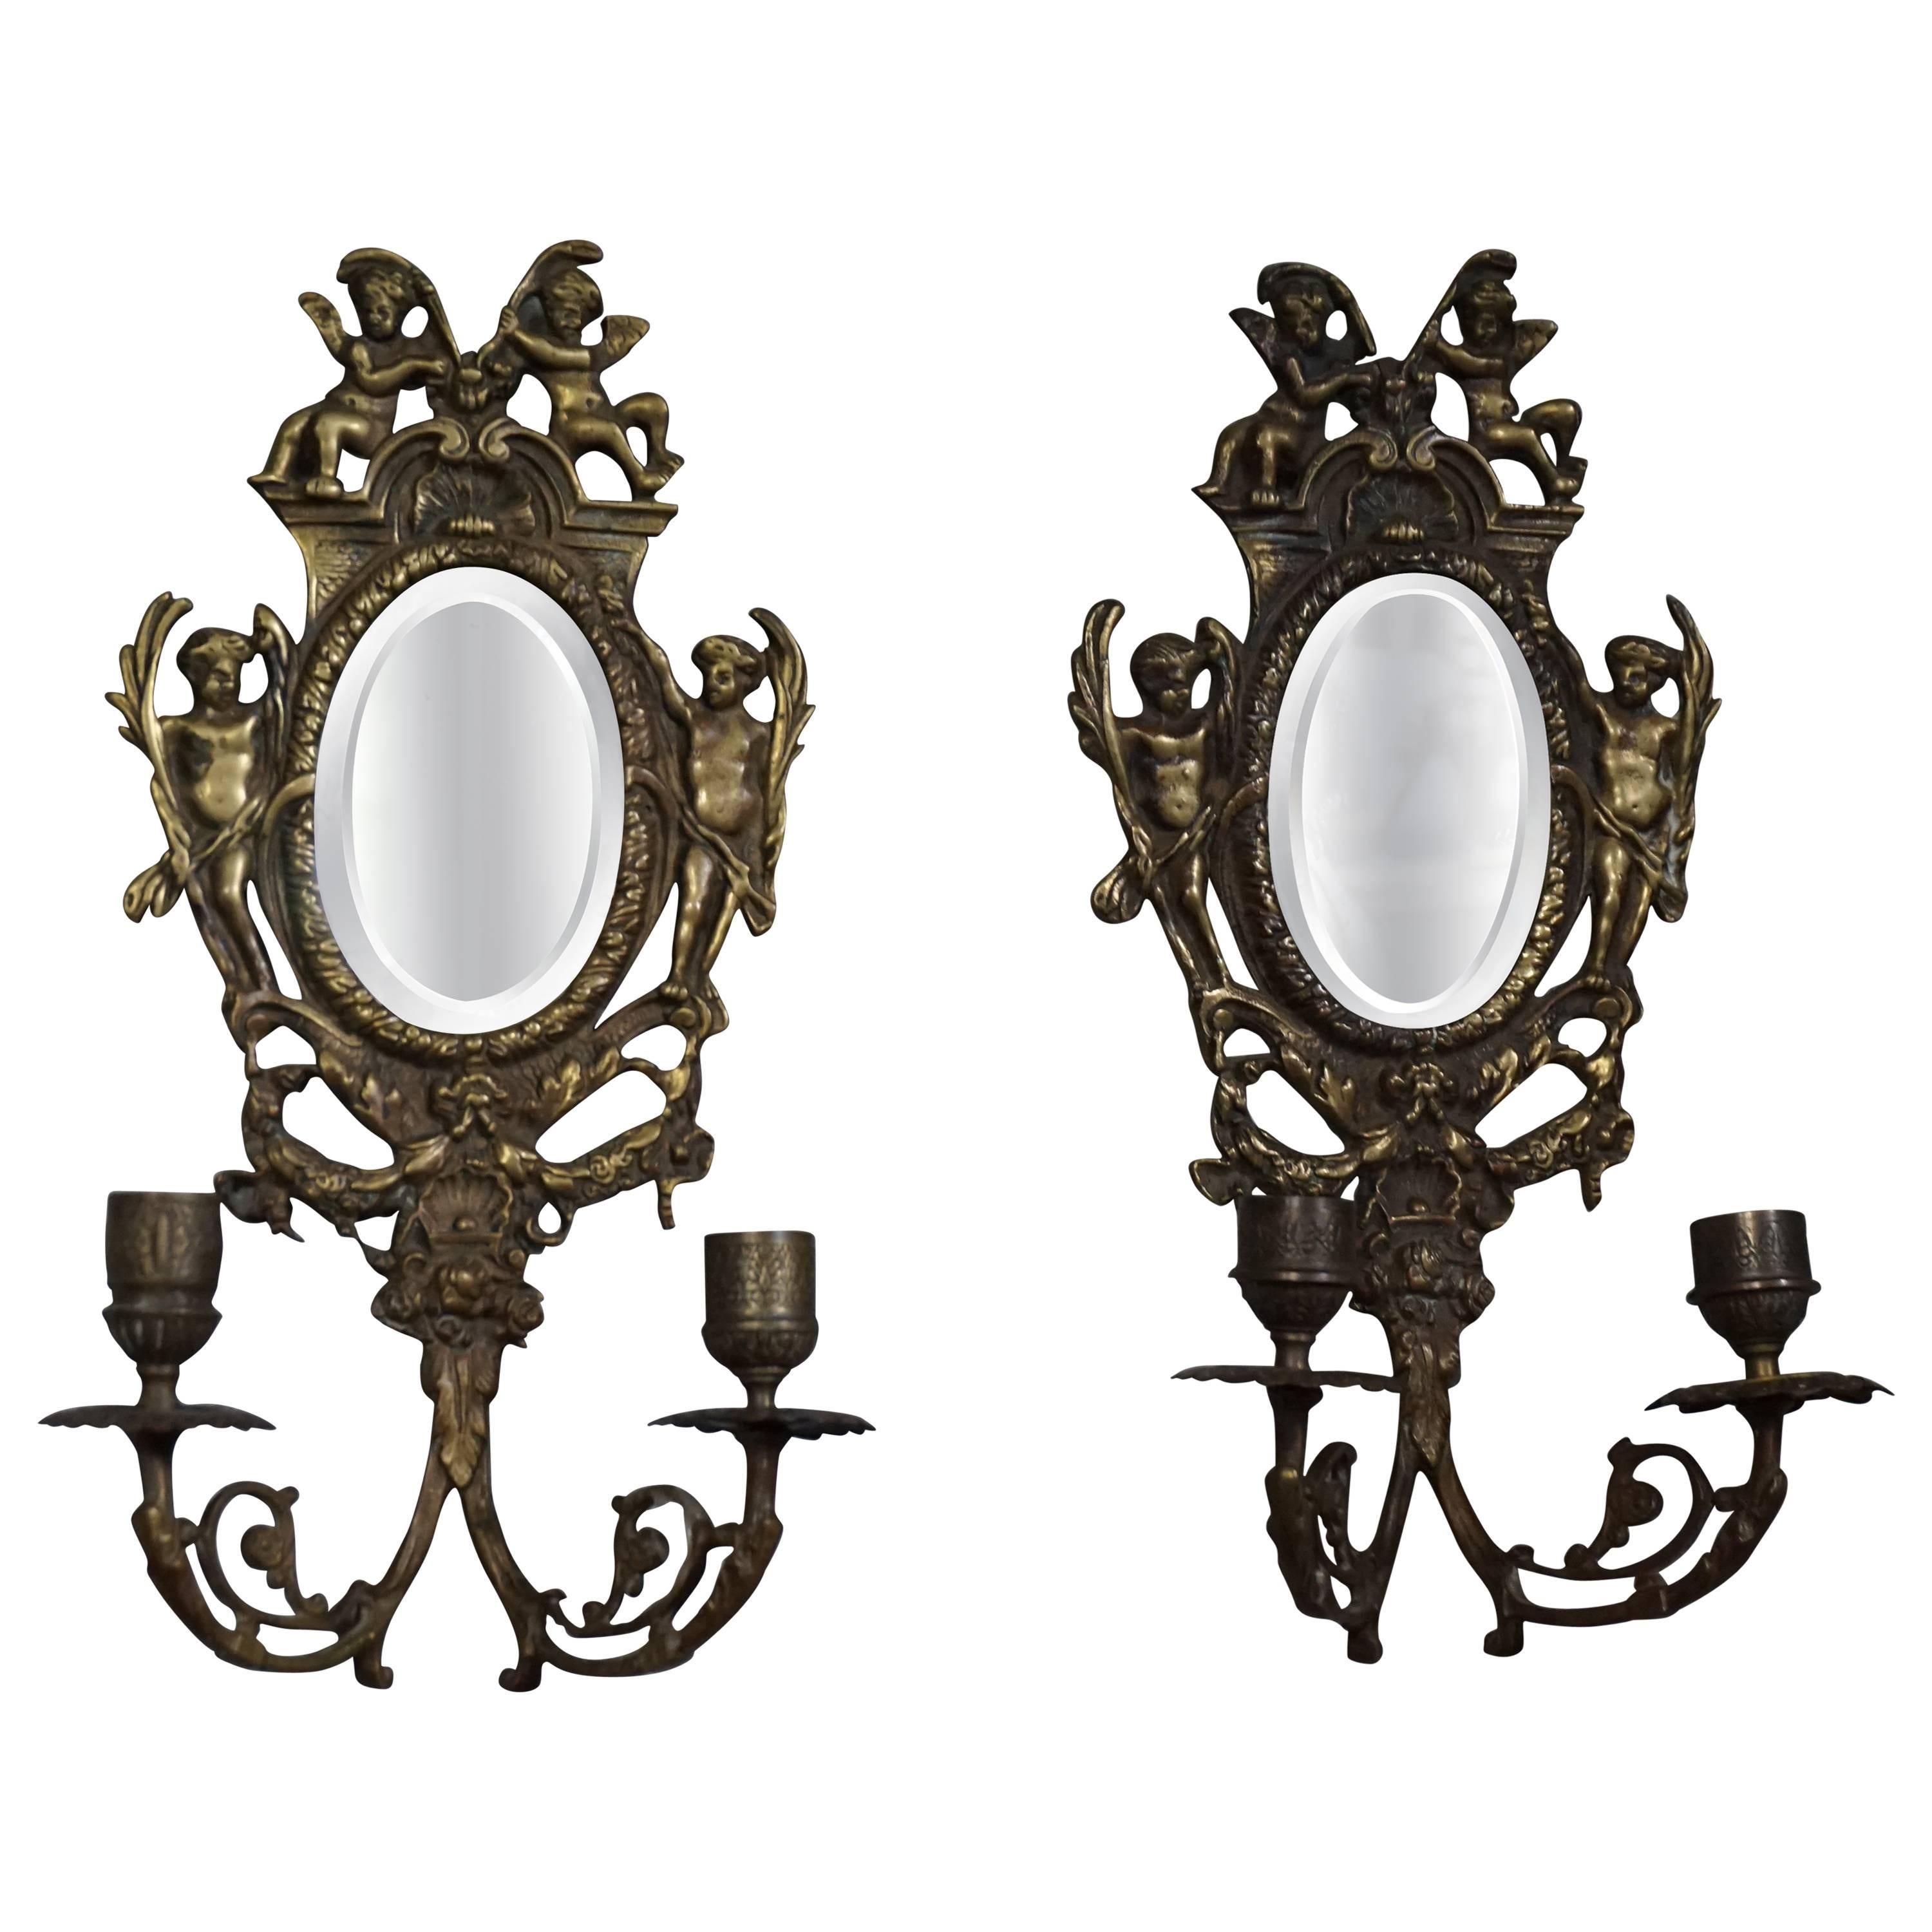 Antique Pair of Cast Bronze Wall Sconces / Candelabras with Oval Beveled Mirrors